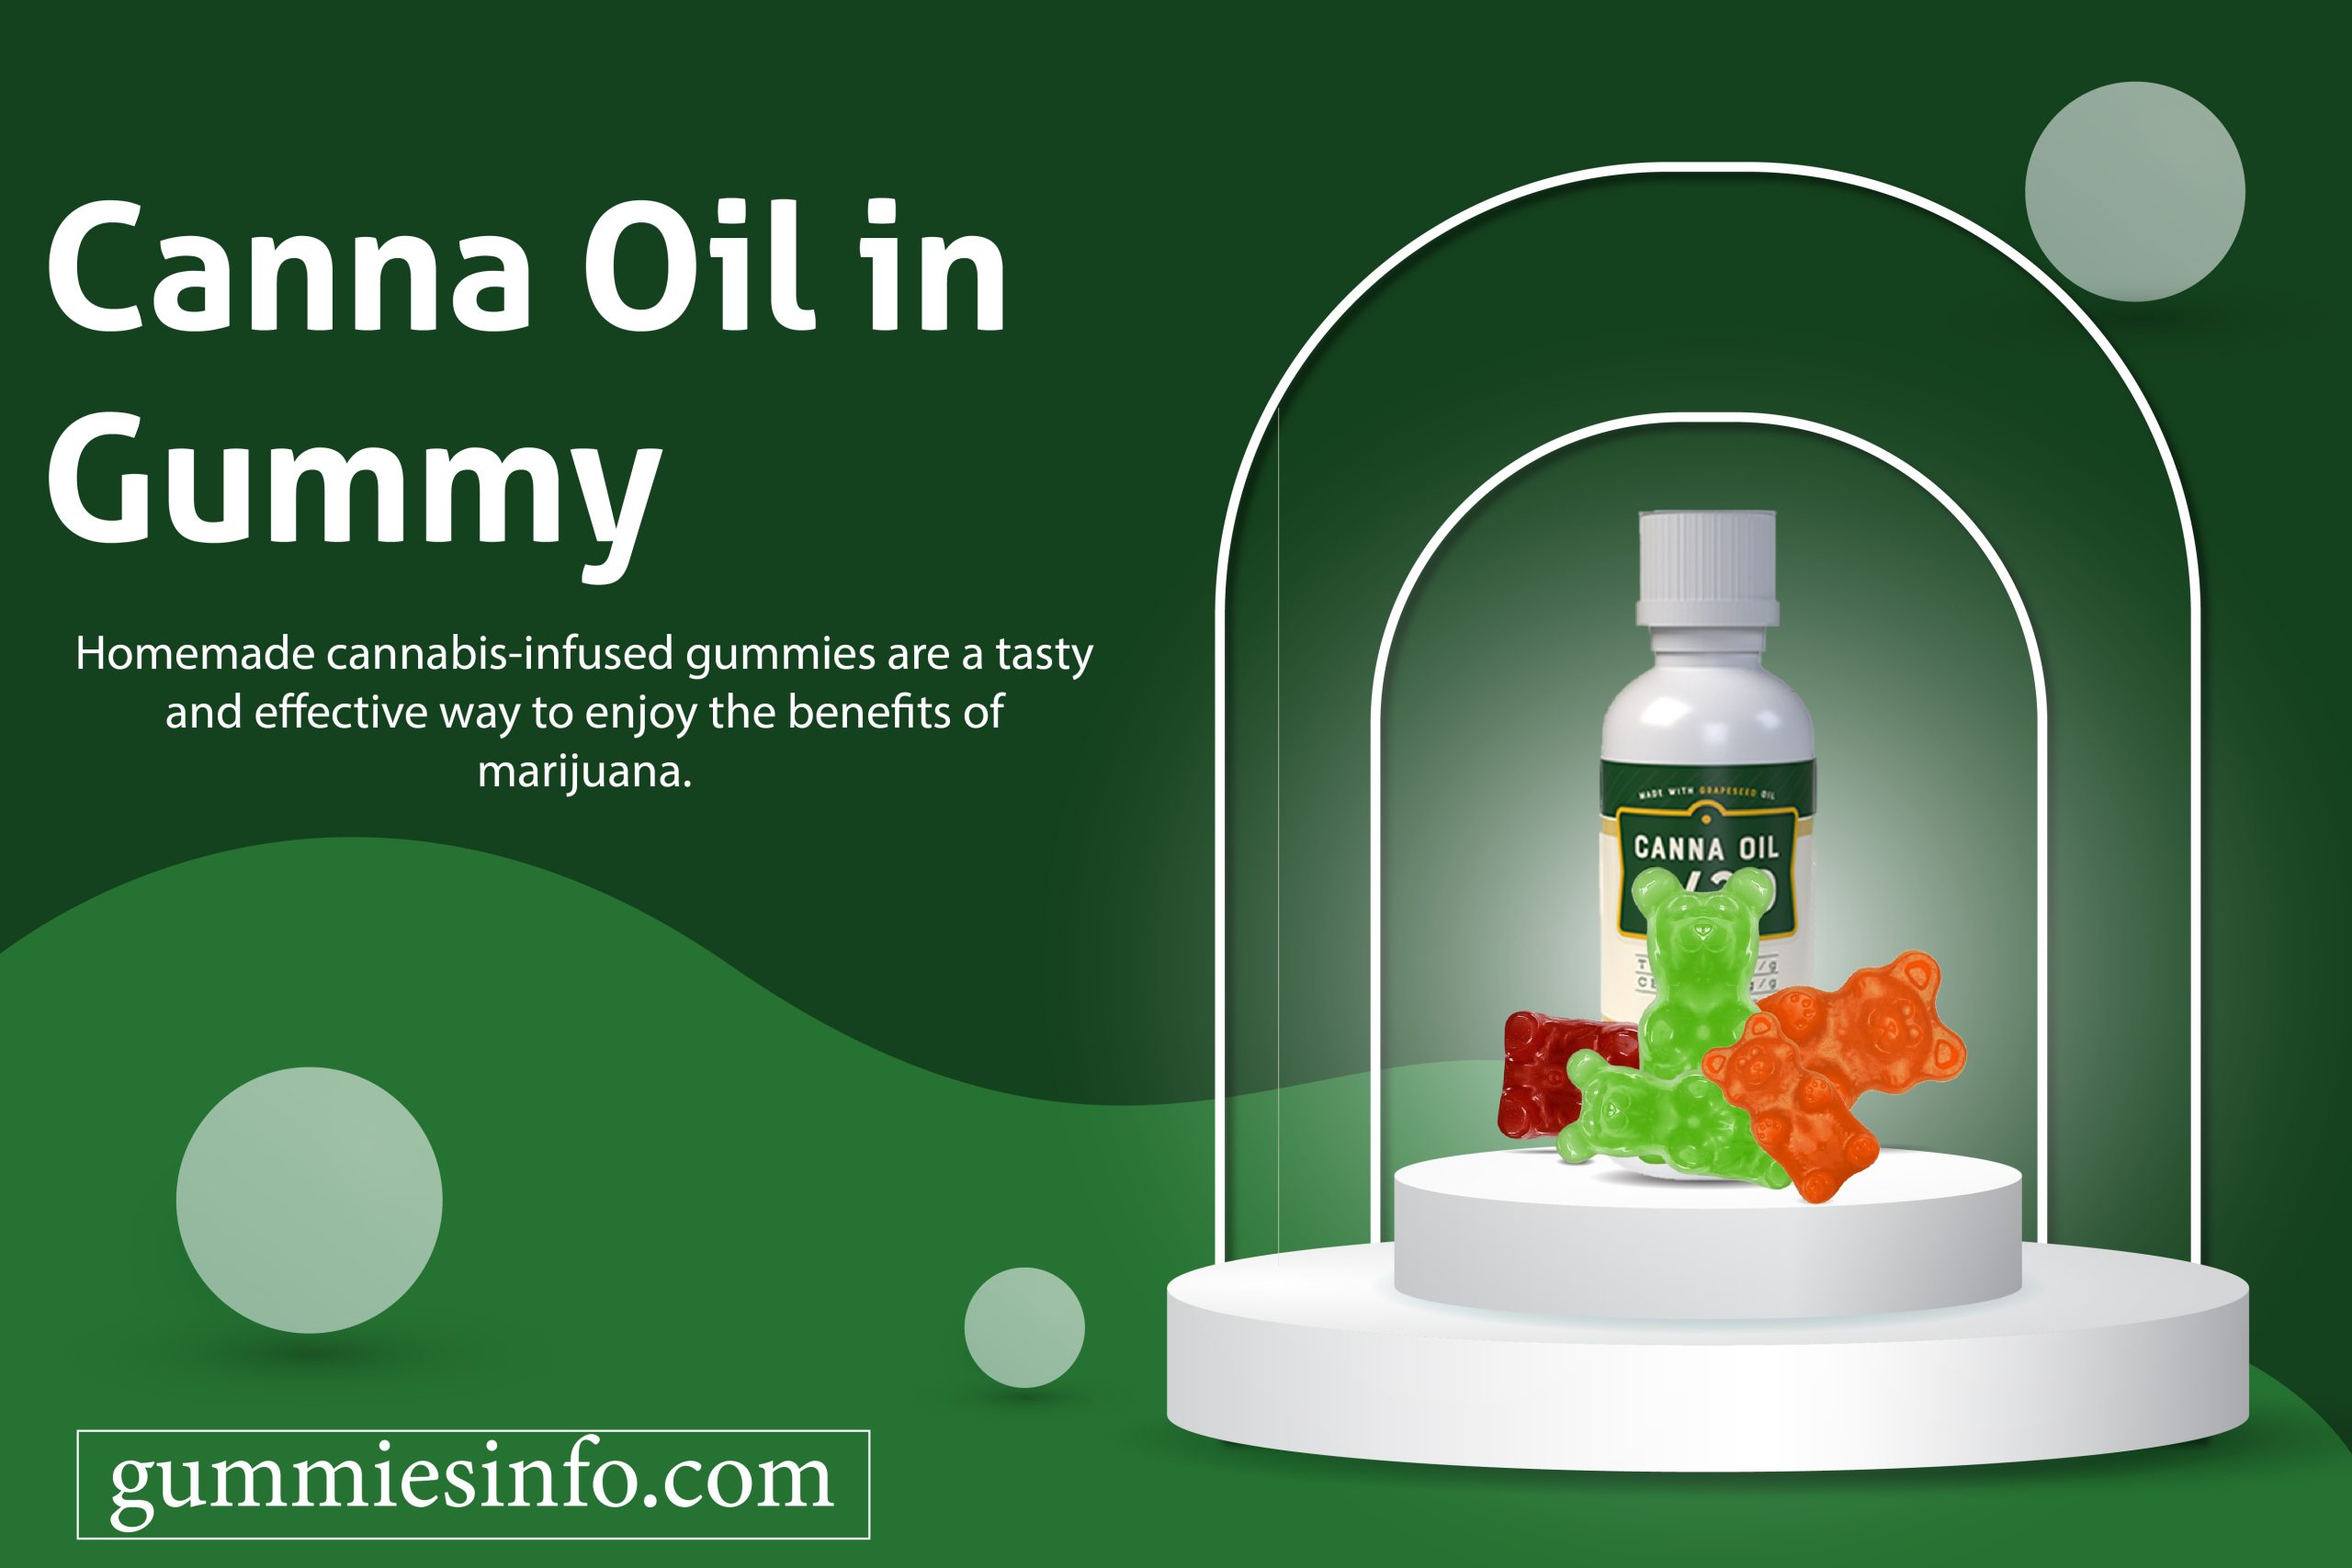 Canna Oil in Gummy